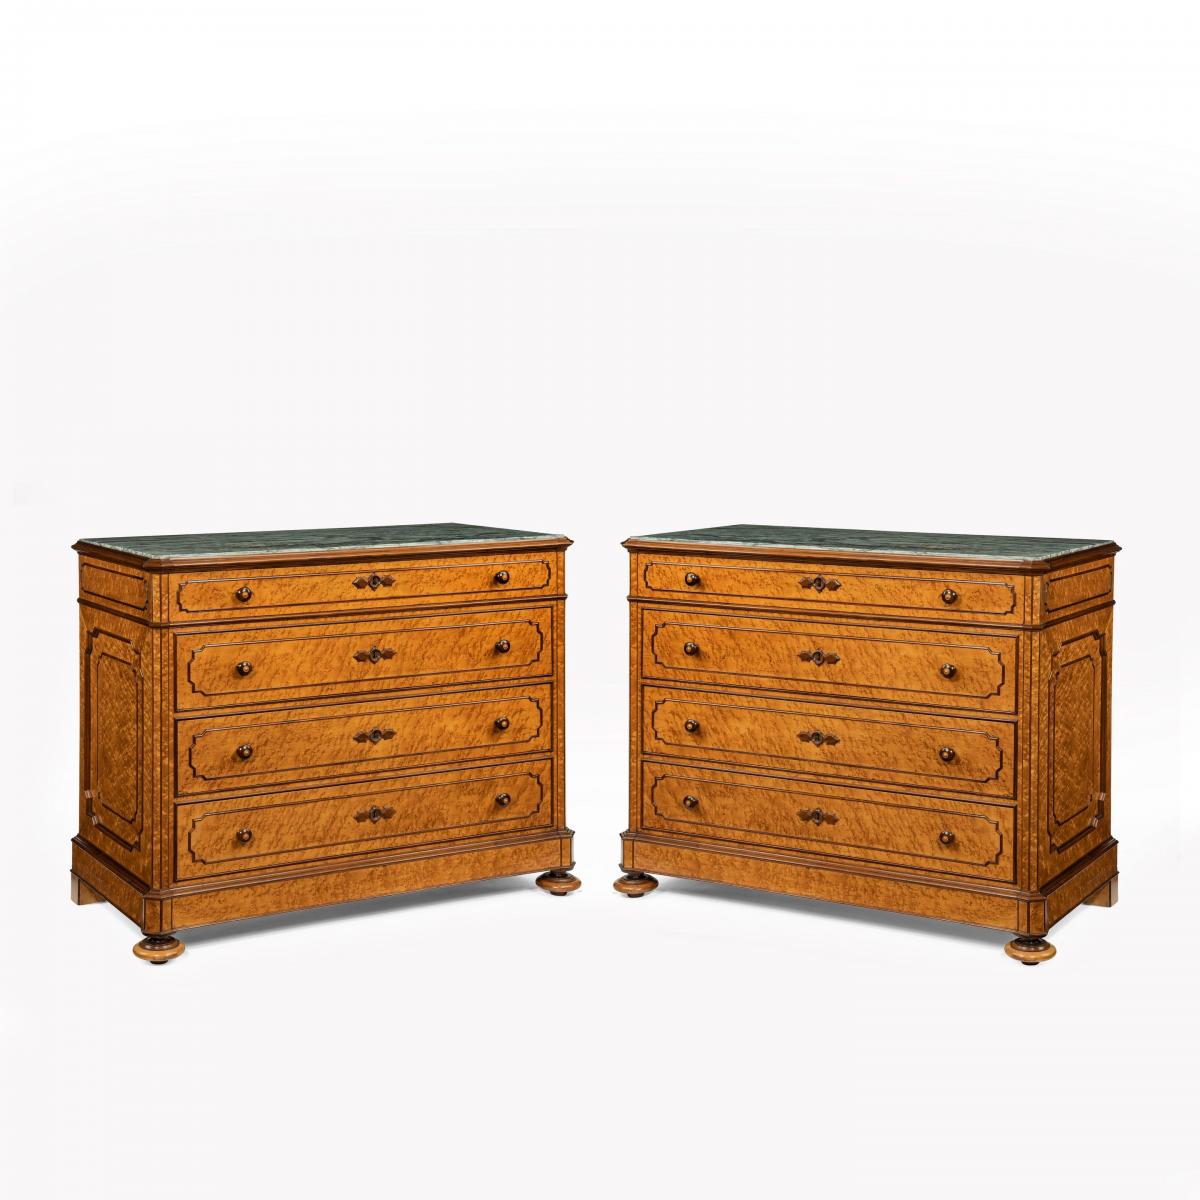 Pair of commodes by Zignago and Picasso